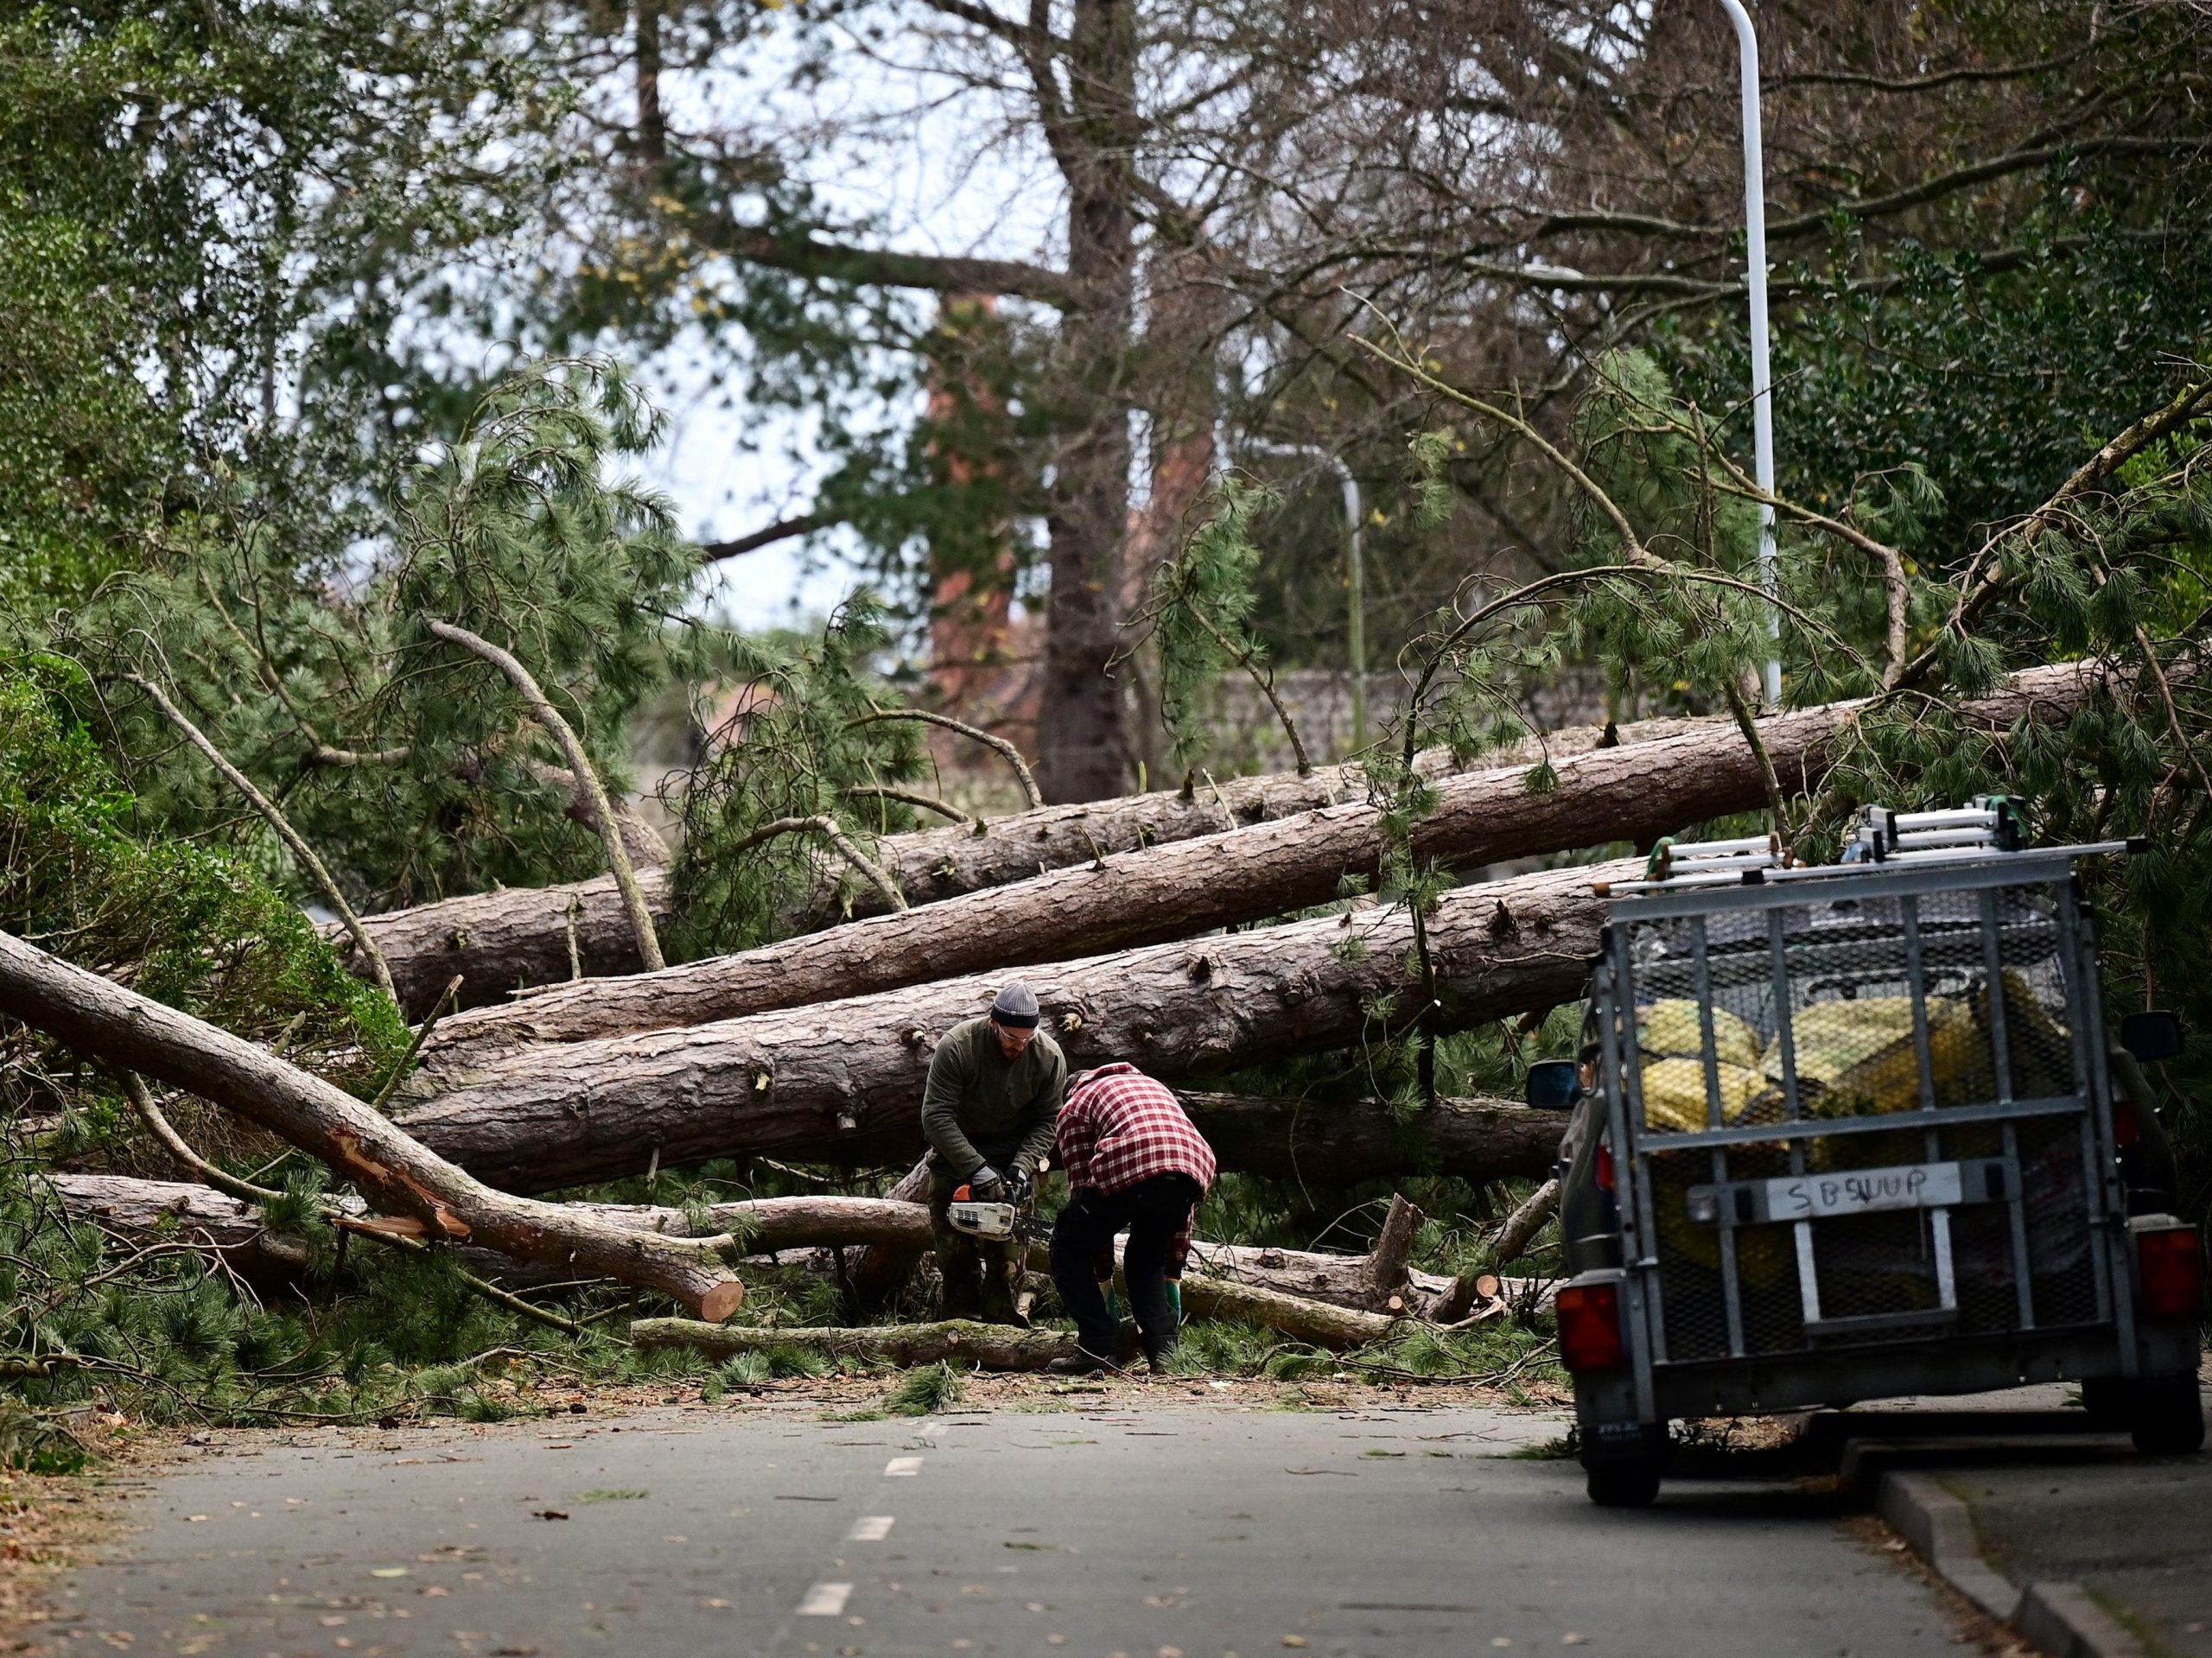 Residents clear branches from a fallen tree in Birkenhead, north west England on November 27, 2021, as "Storm Arwen" triggered a rare "red weather" warning.